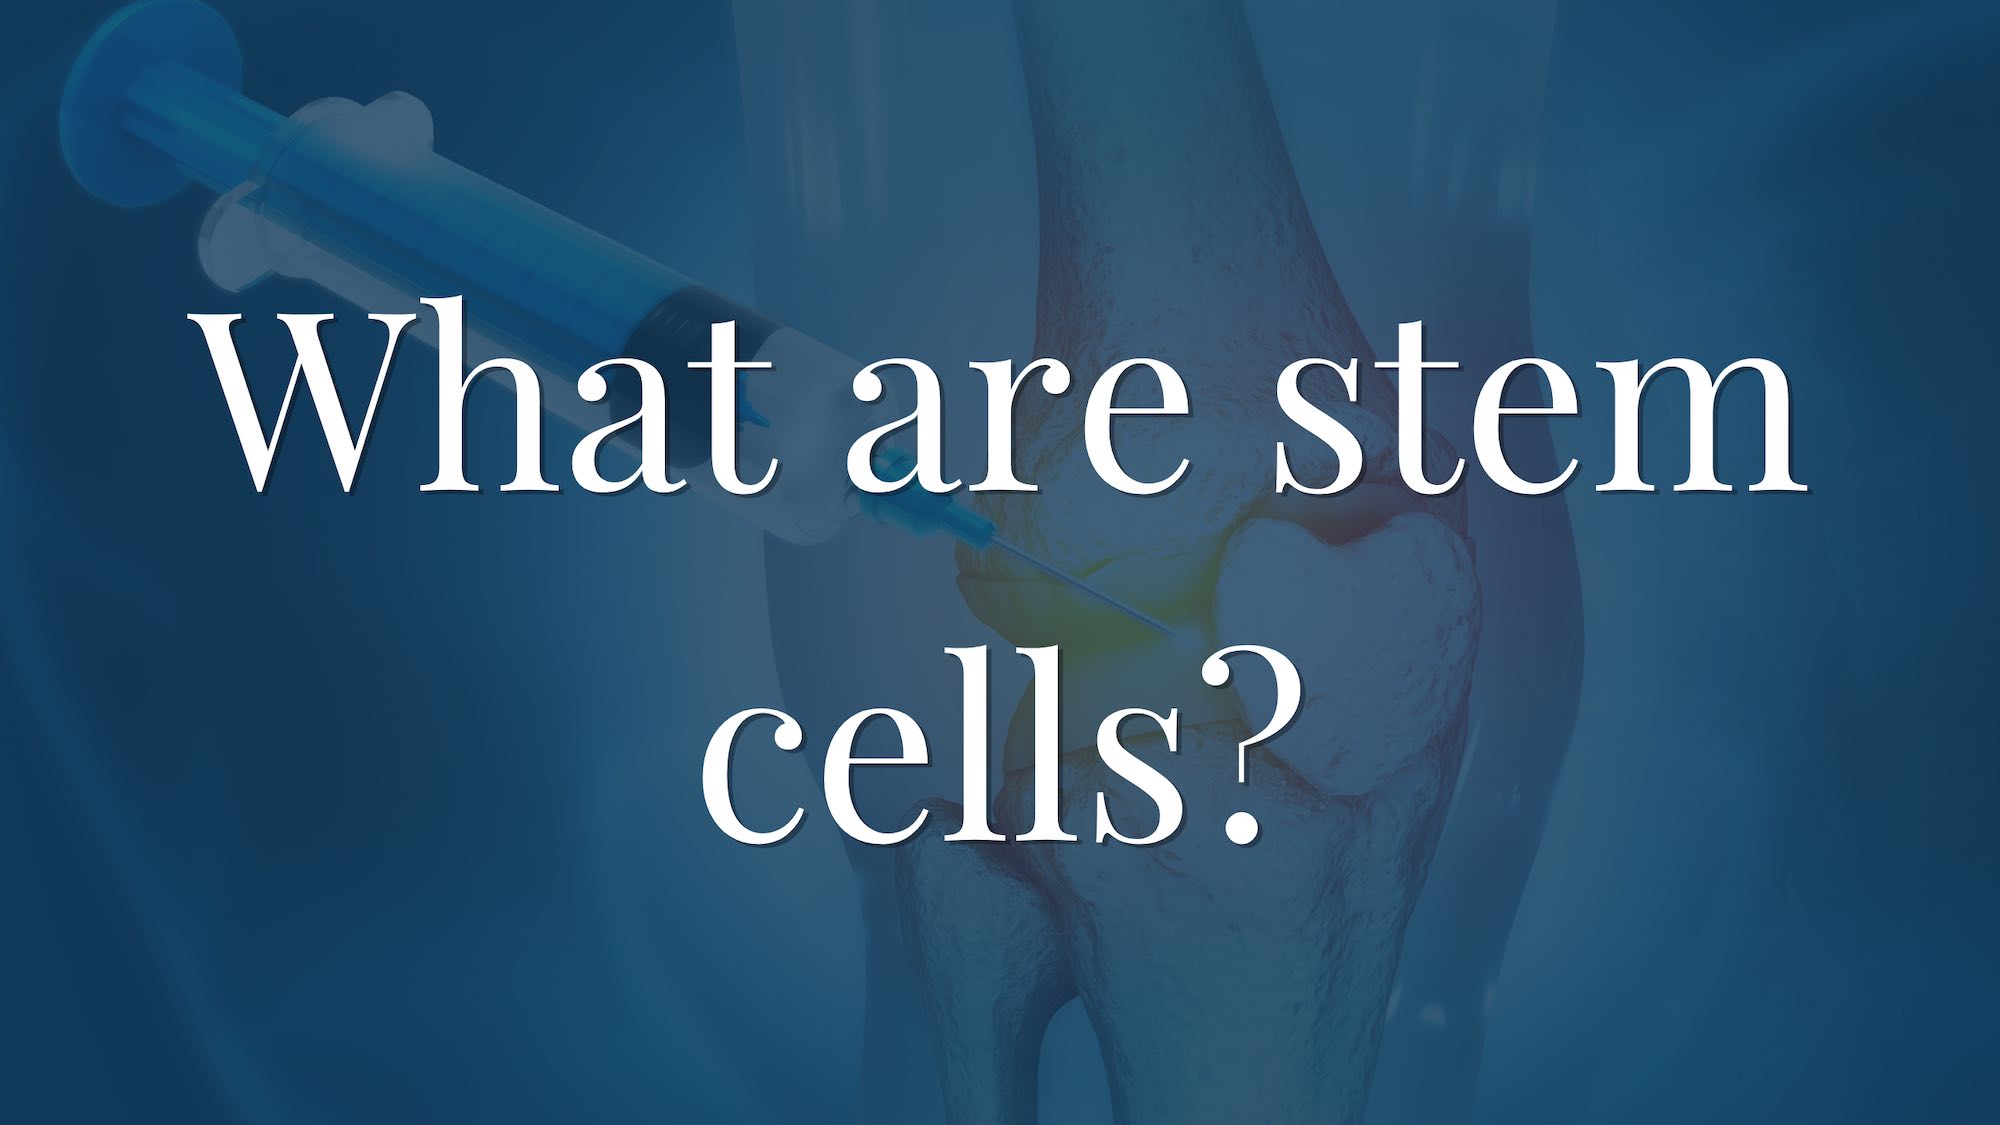 What are stem cells